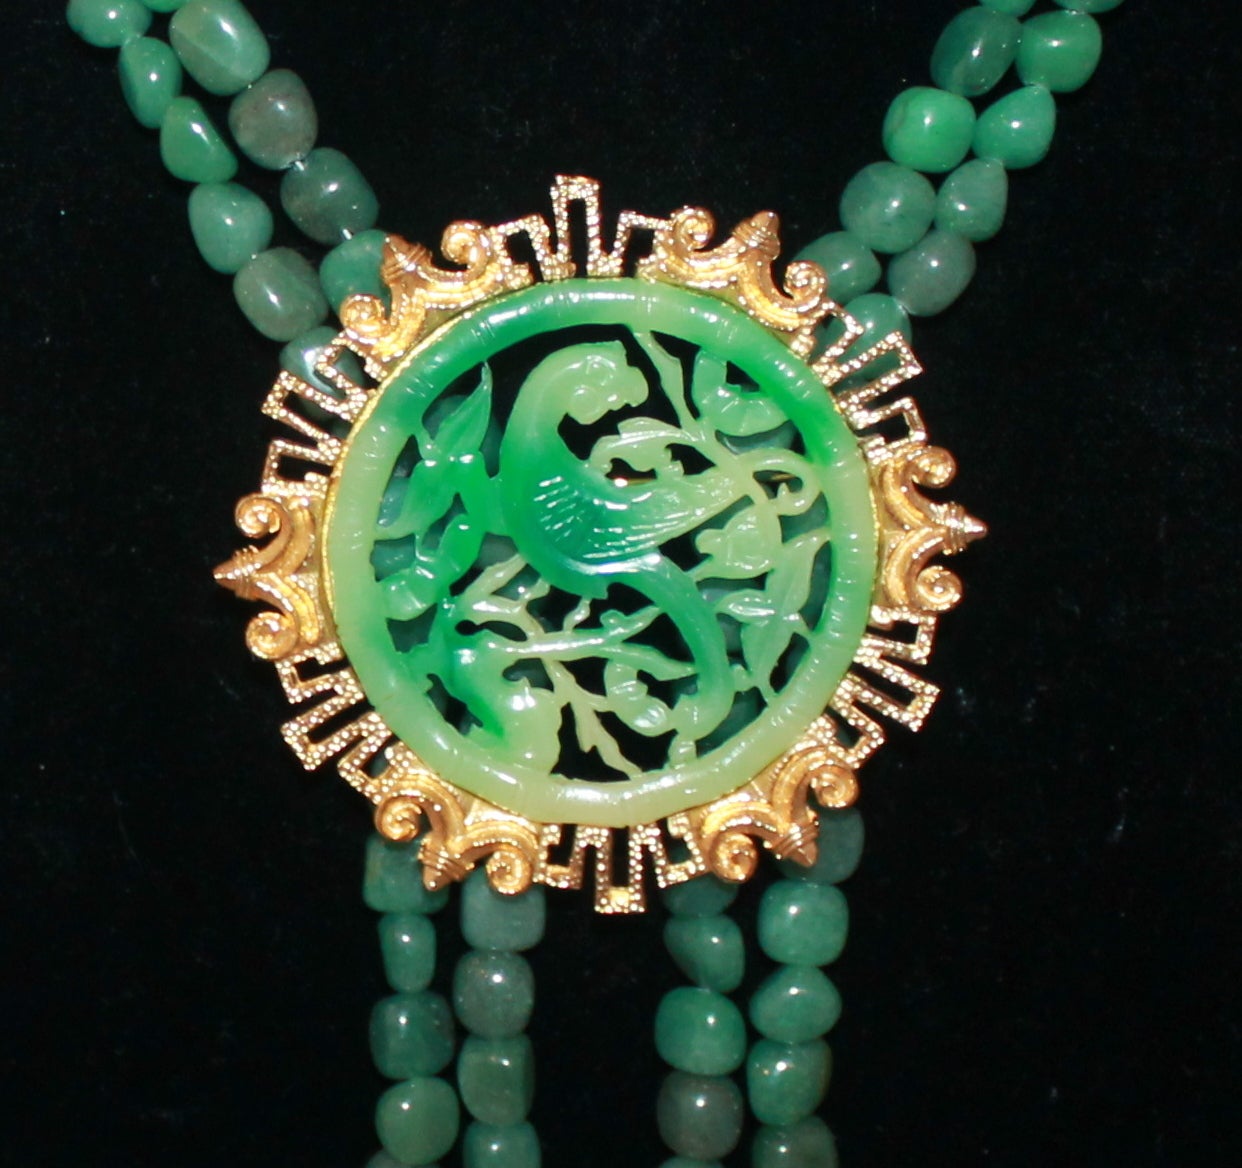 Vendome Vintage Jade Bead & Goldtone Pendant Necklace. This necklace is in excellent condition and has a magnetic clasp. Circa 1960-1970s.

Measurements:
Length (Half, while hanging)- 17